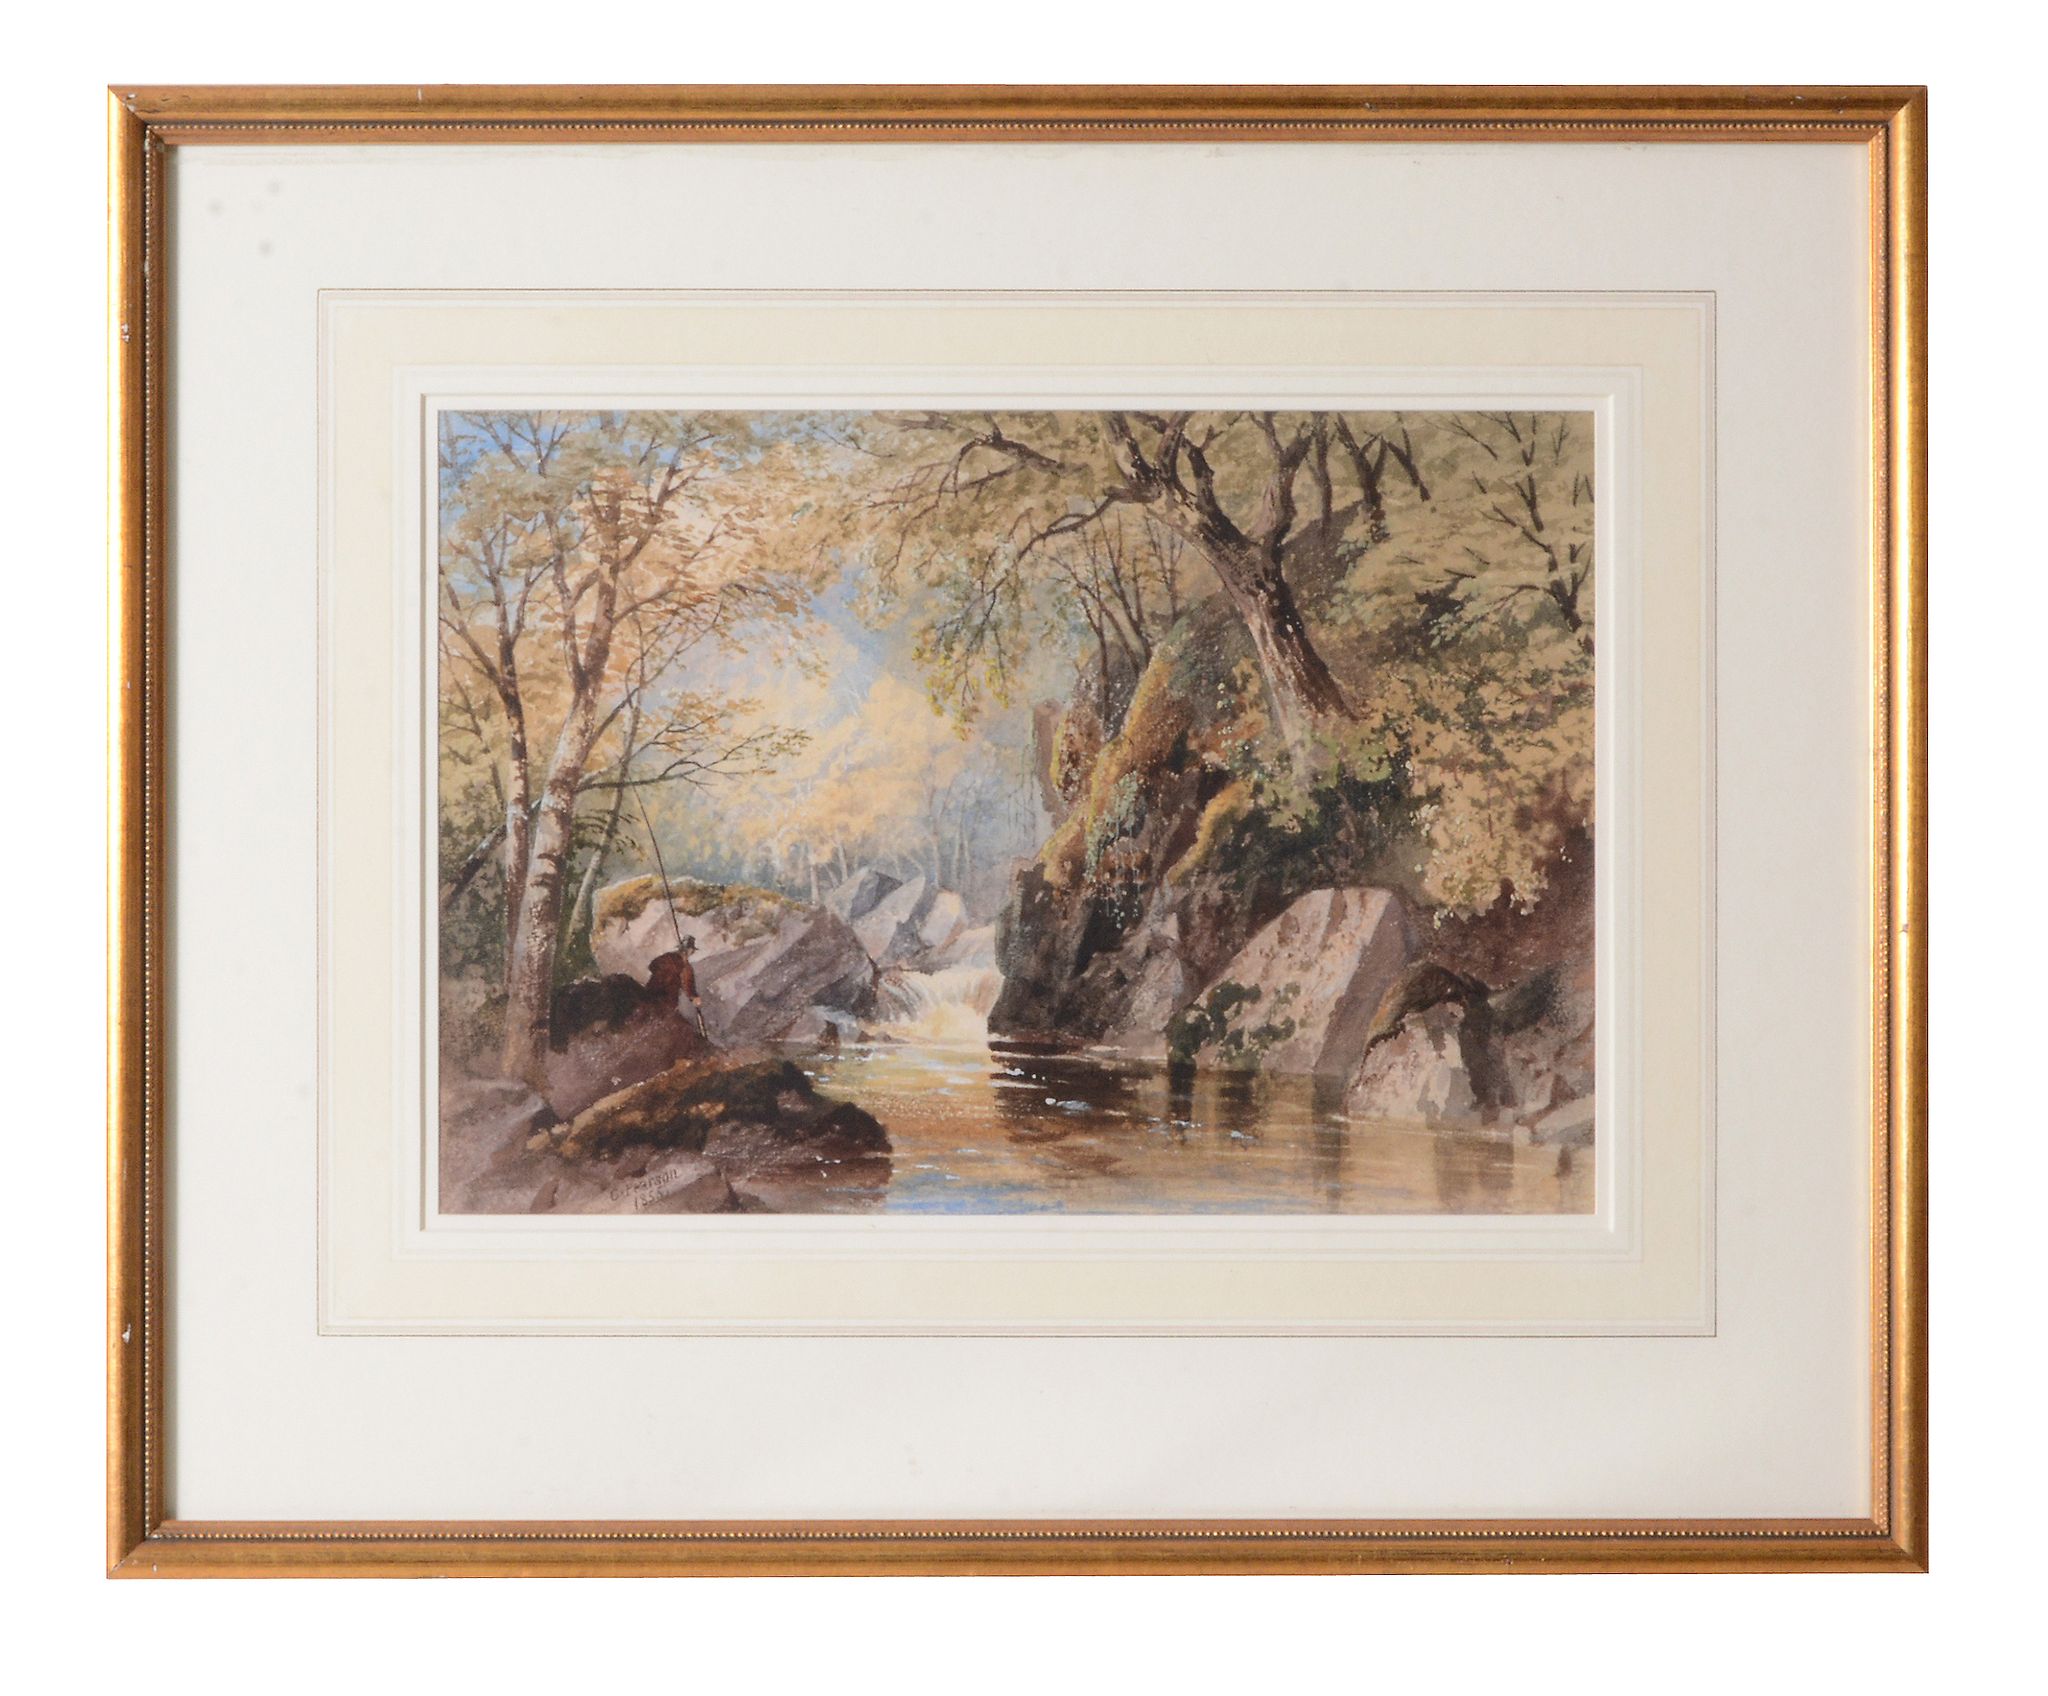 Cornelius Pearson (1805-1891) - Fisherman in a wooded landscape  Watercolour heightened with white - Image 2 of 3